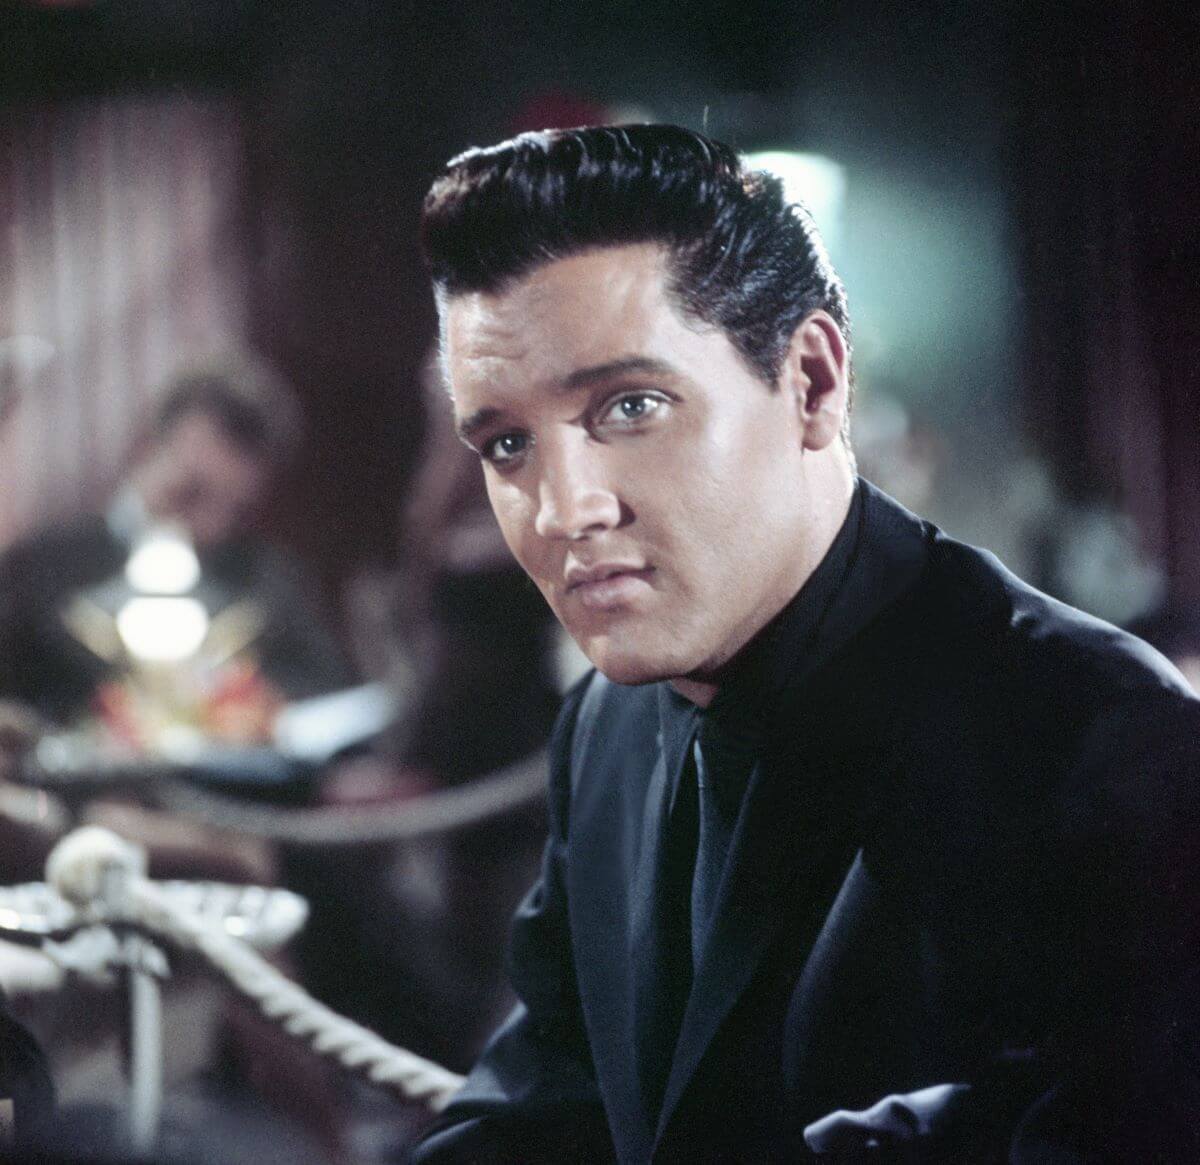 Elvis wears a black suit and sits at a bar.